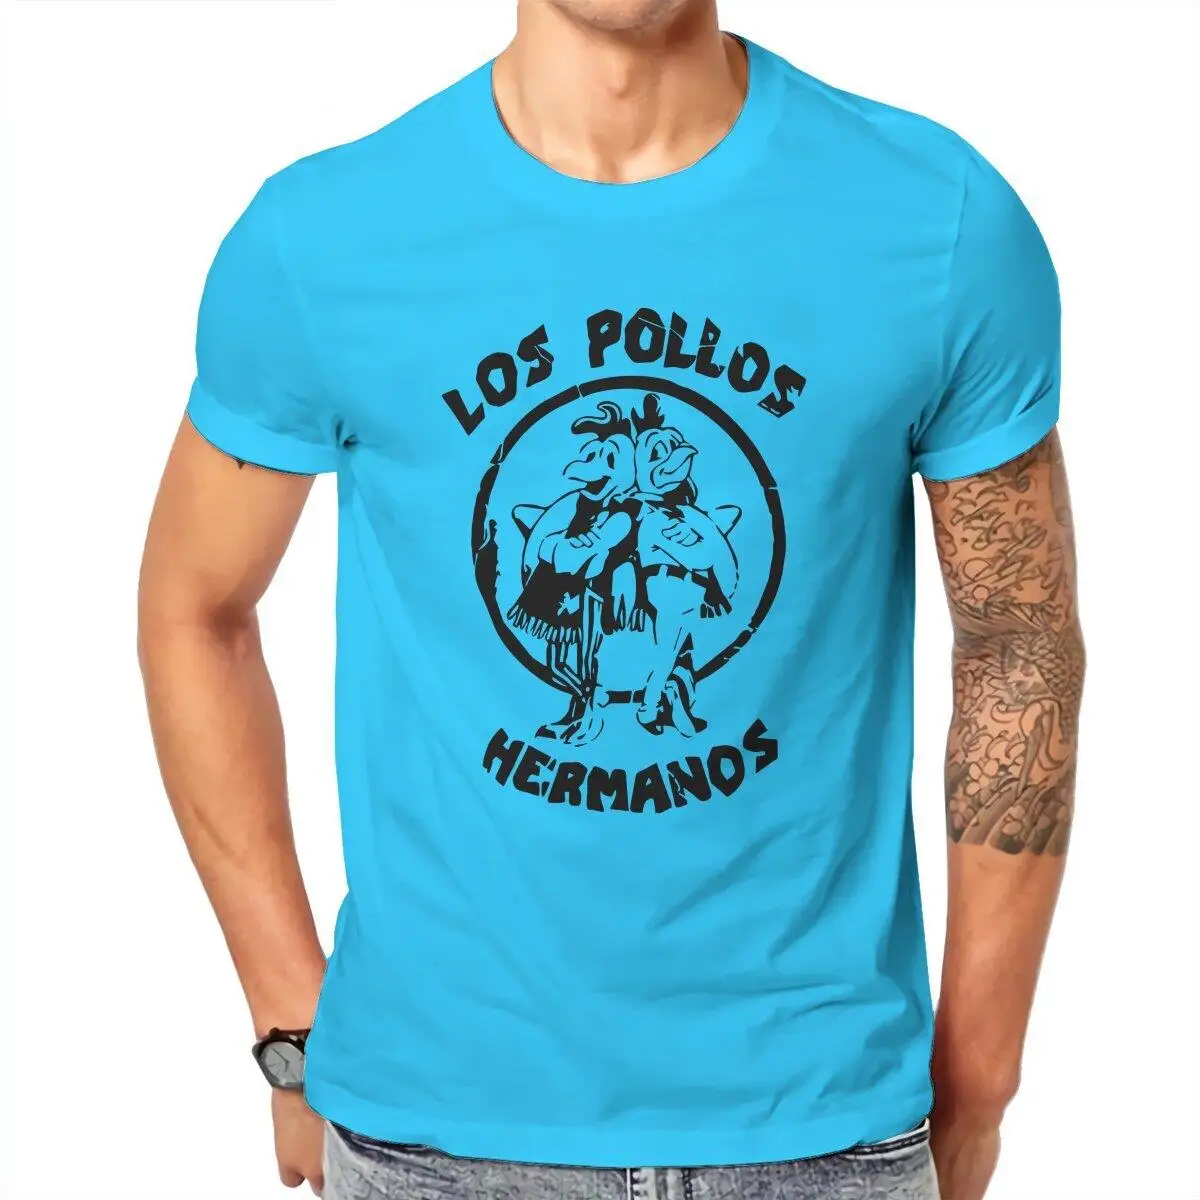 Breaking Bad T Shirts for Men Cotton T-Shirt Crewneck Los Pollos Hermanos Chicken Brothers Tee Shirt Short Sleeve Clothes Gift